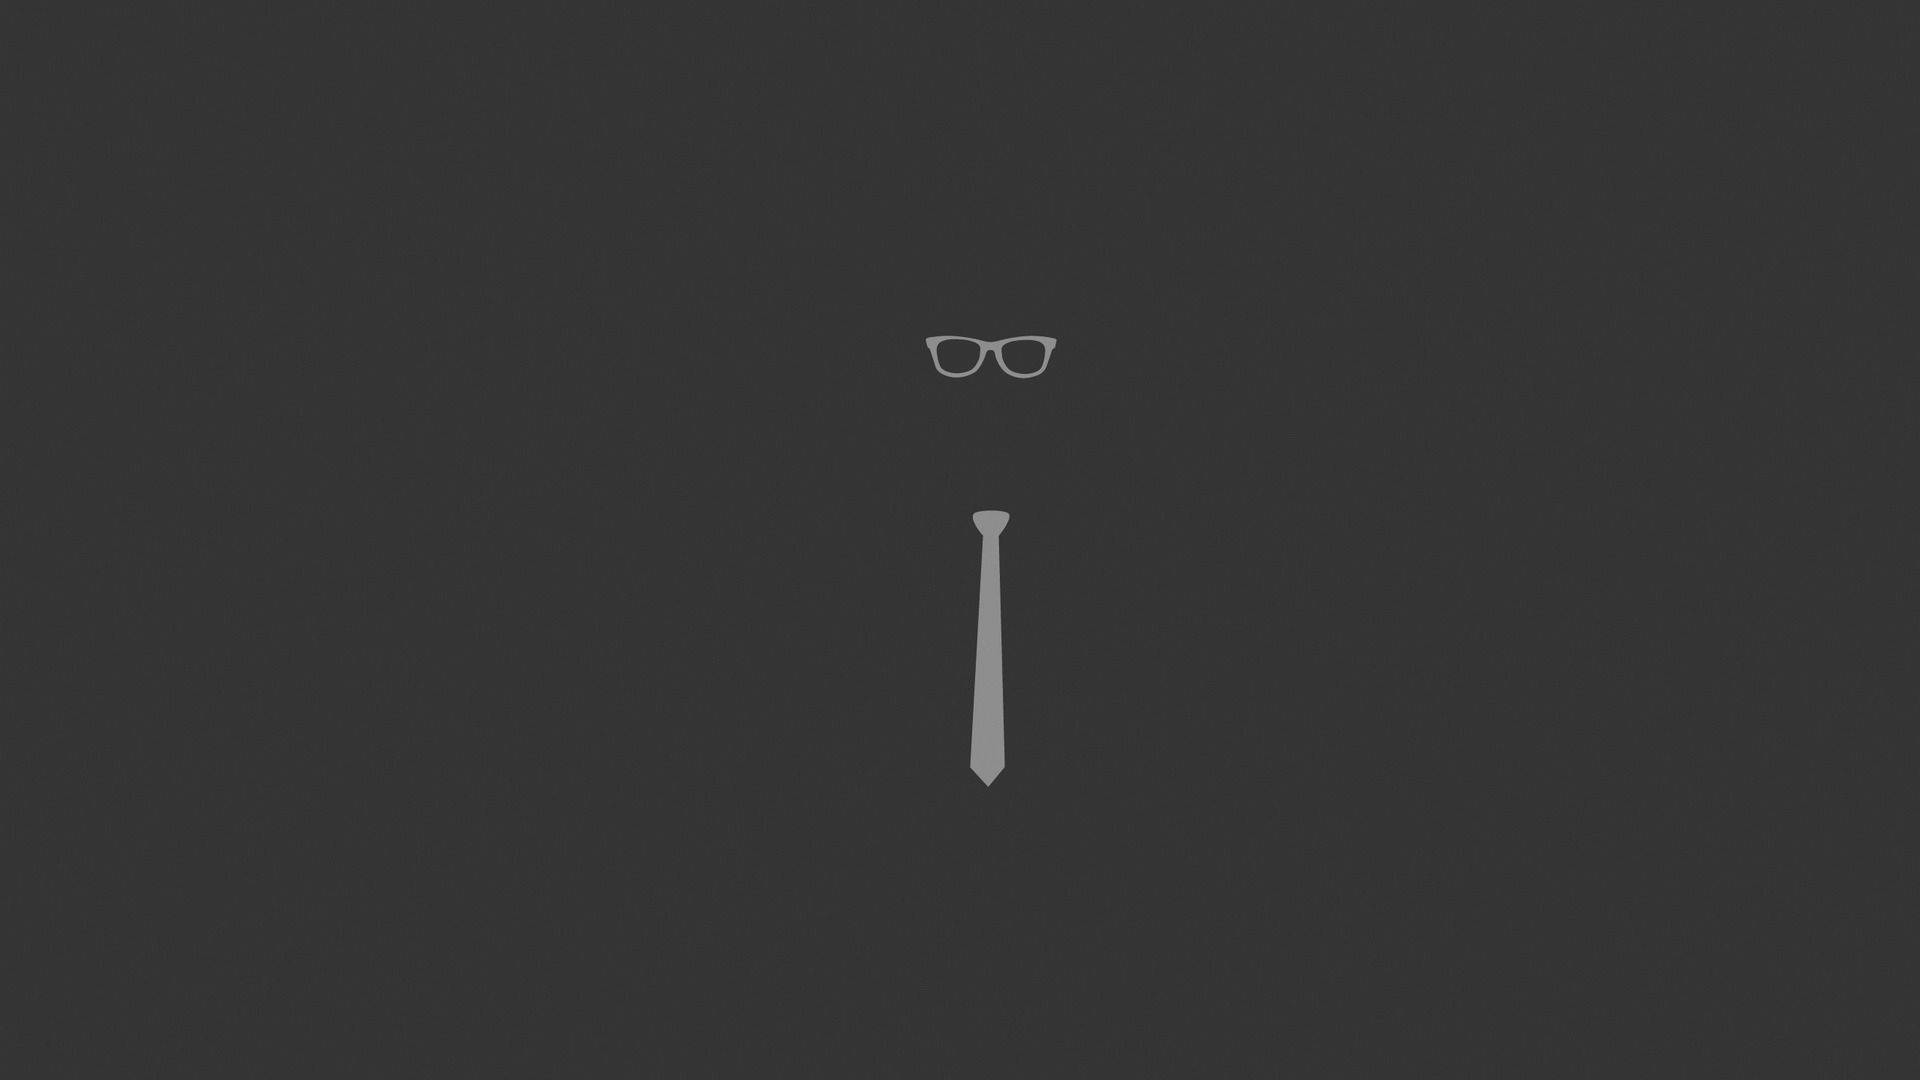 Simple Glasses And Tie Background